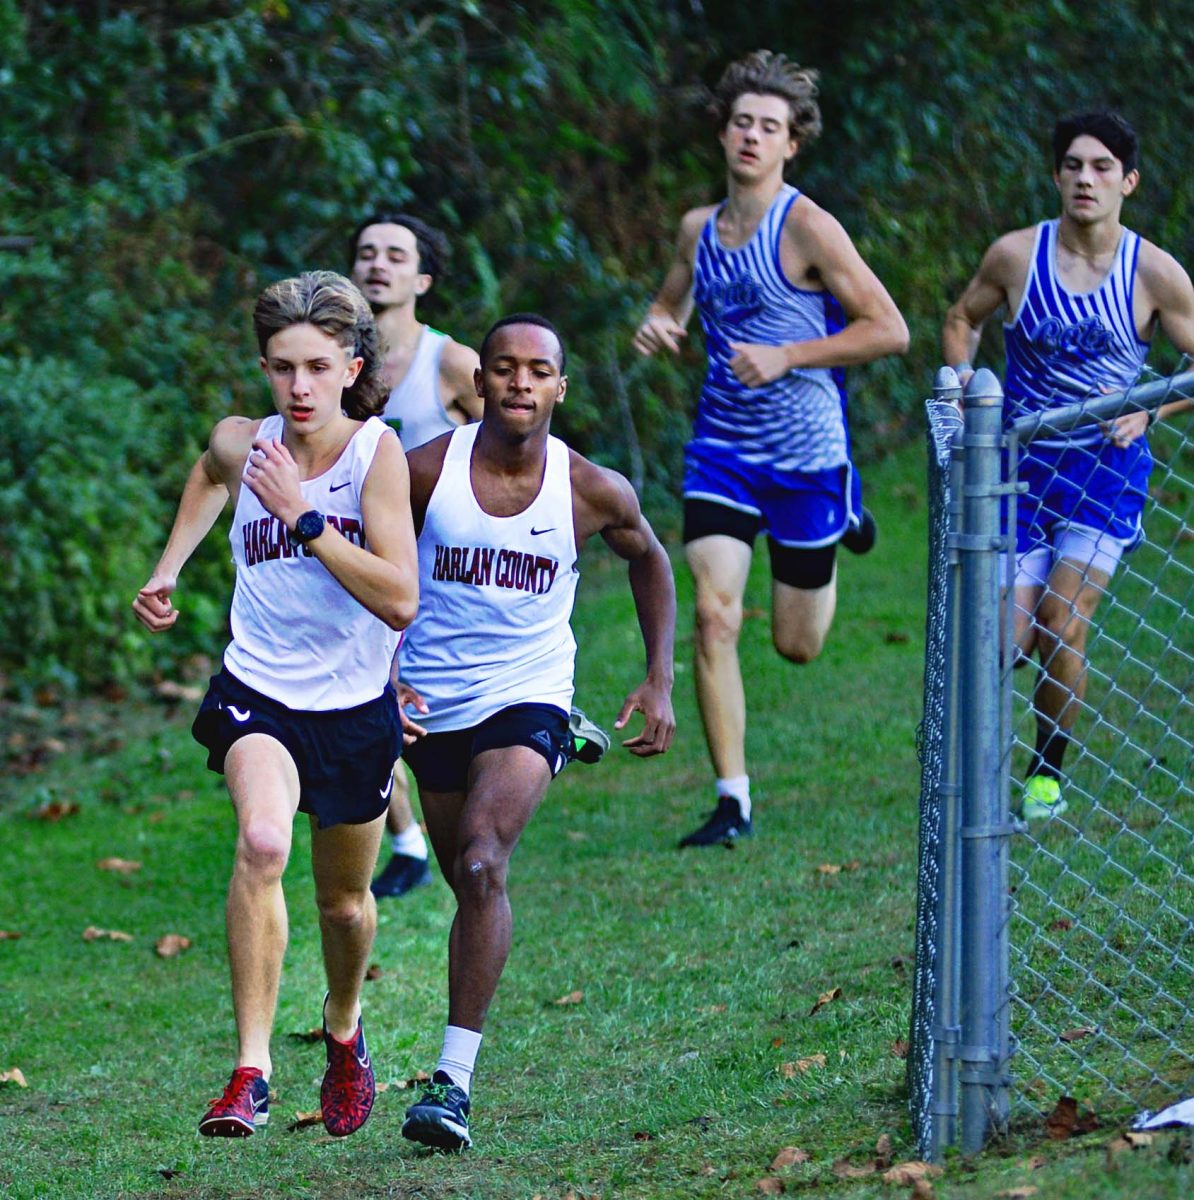 Harlan Countys Tanner Daniels and Jacob Schwenke are pictured during the Southeastern Kentucky Conference meet on Tuesday. Daniels was the top finisher in the boys division.